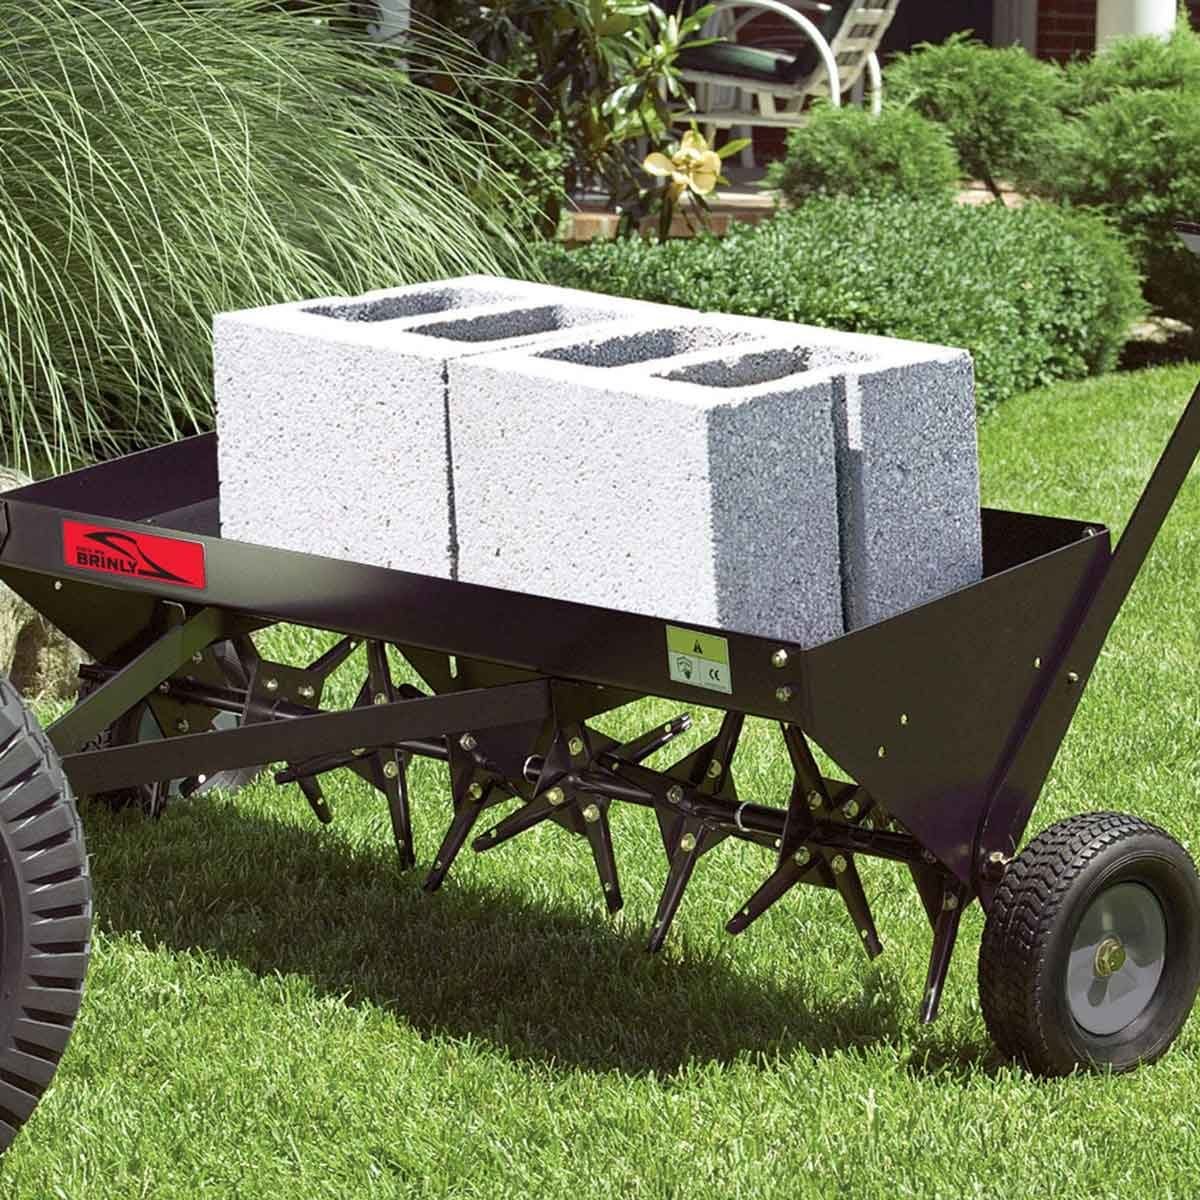 Lawn Aerators for sale in Lily, Kentucky